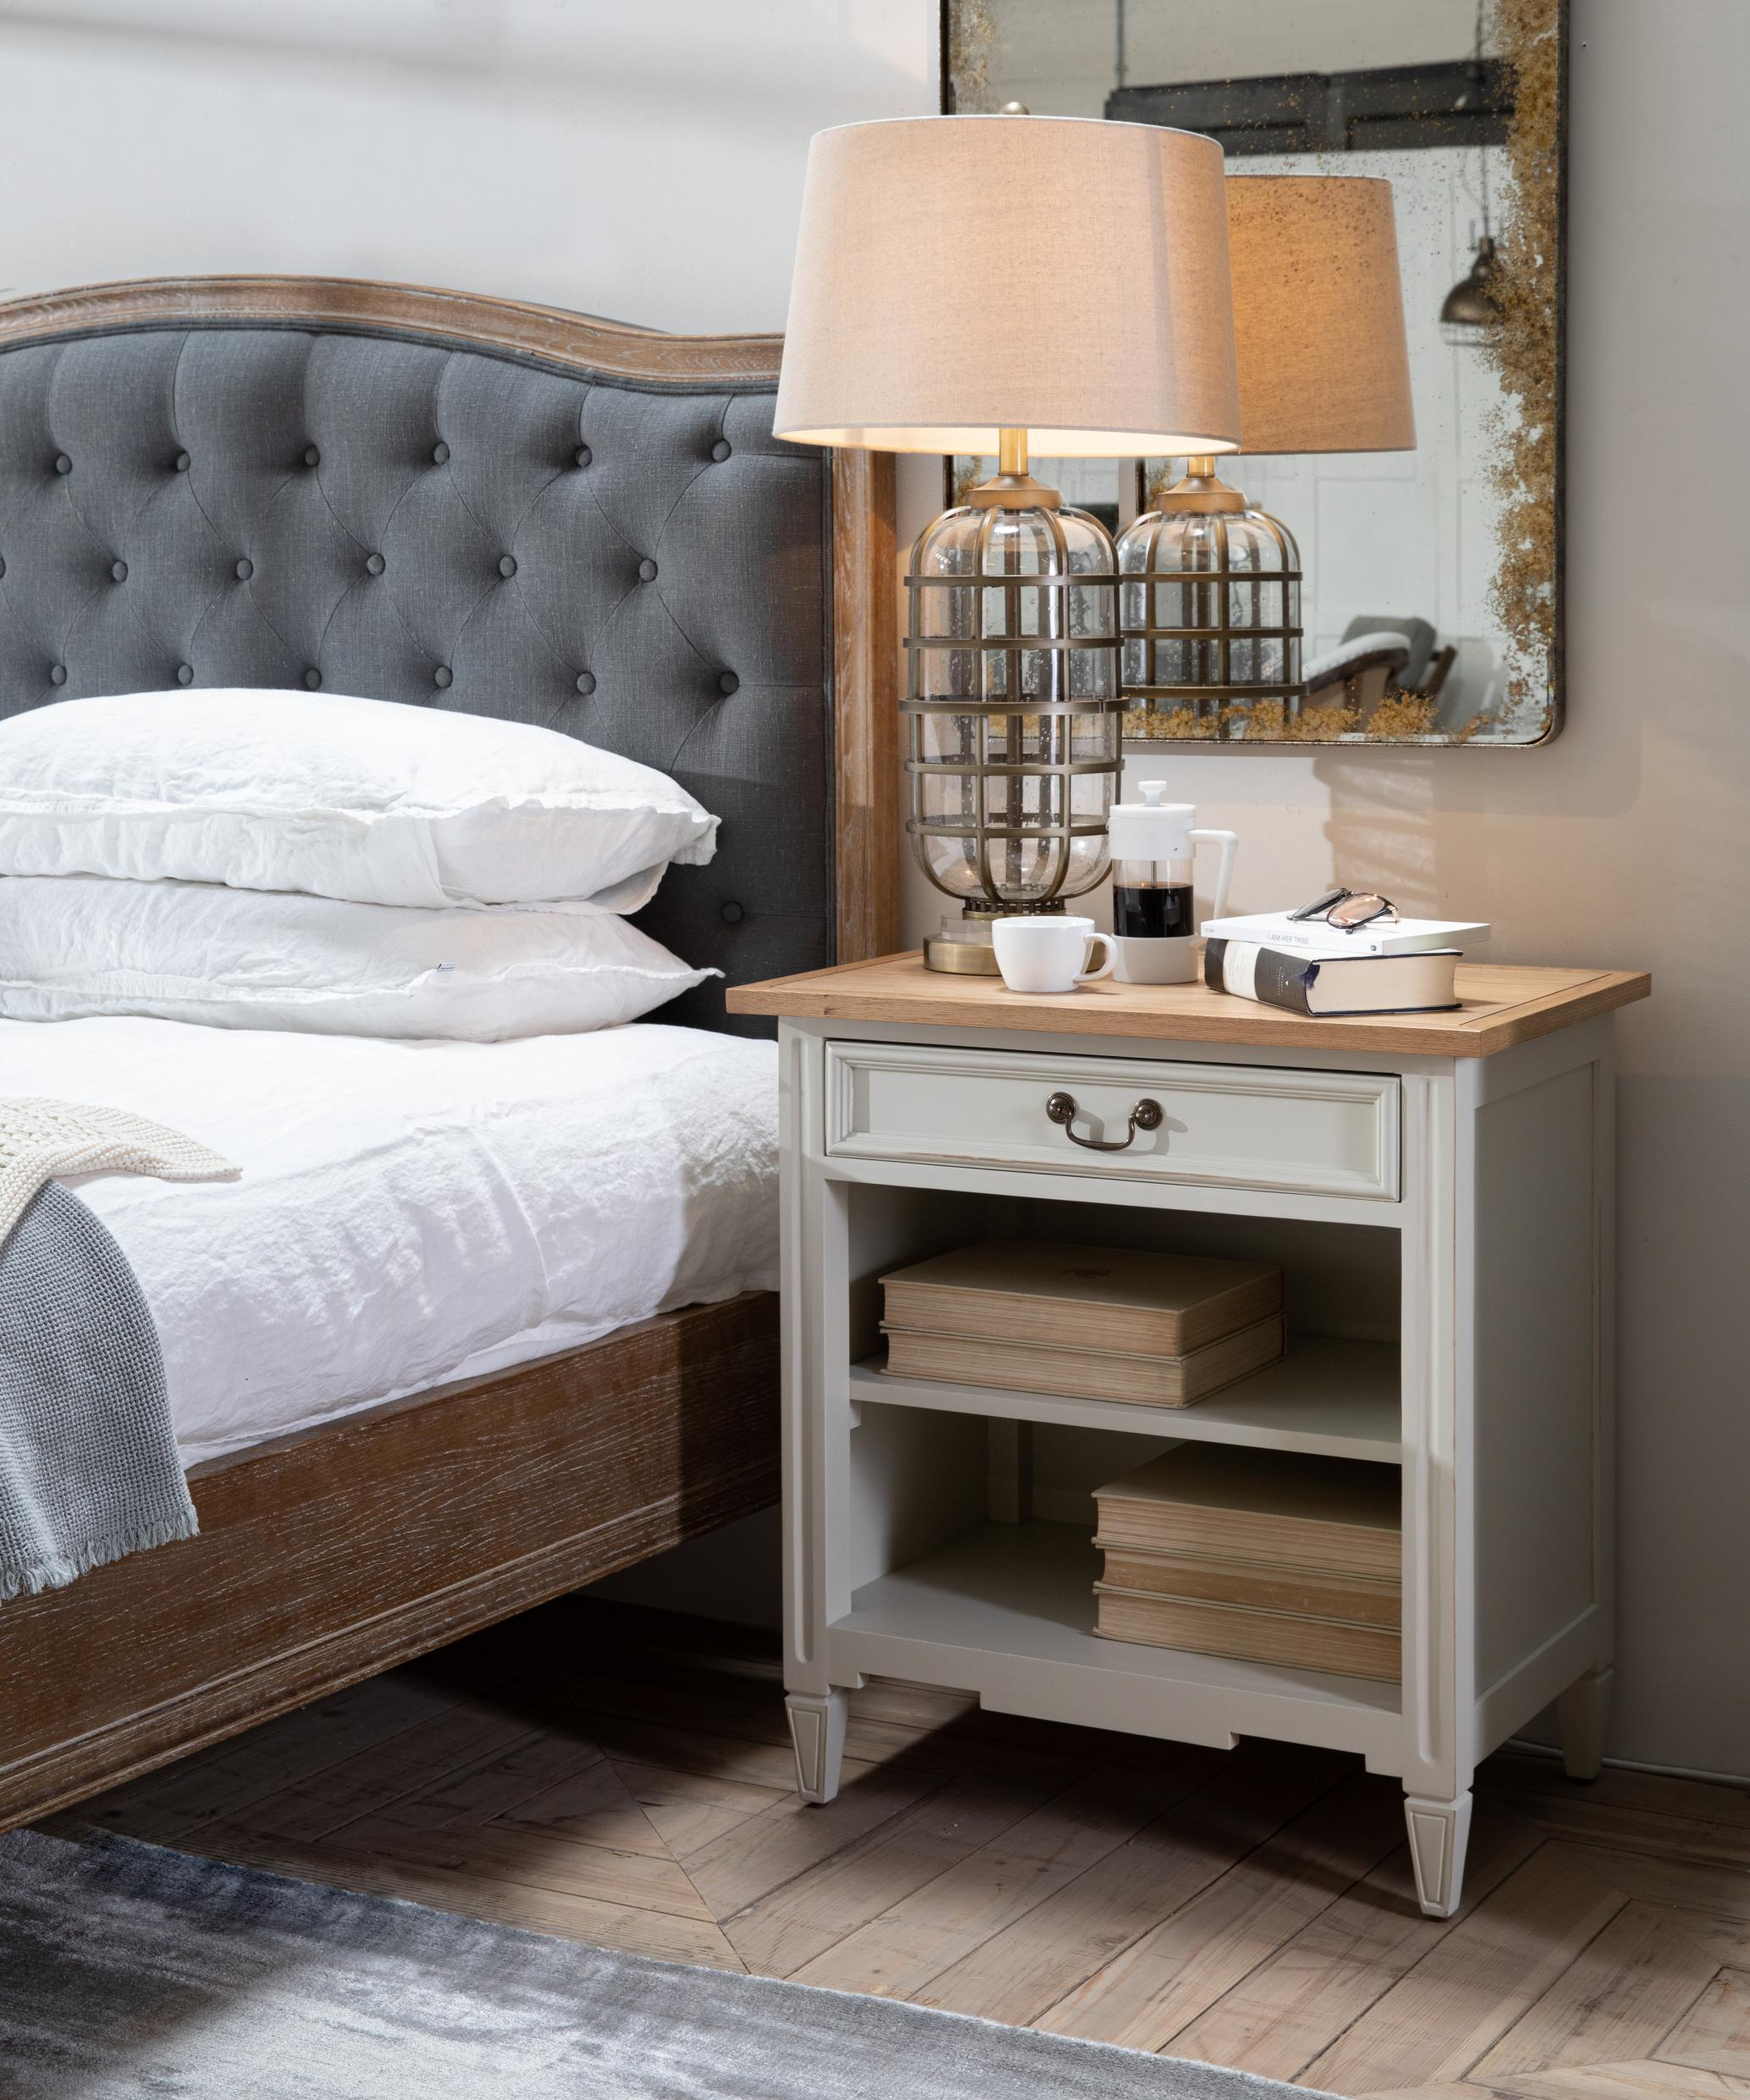 Block & Chisel weathered oak bedside table with antique white base